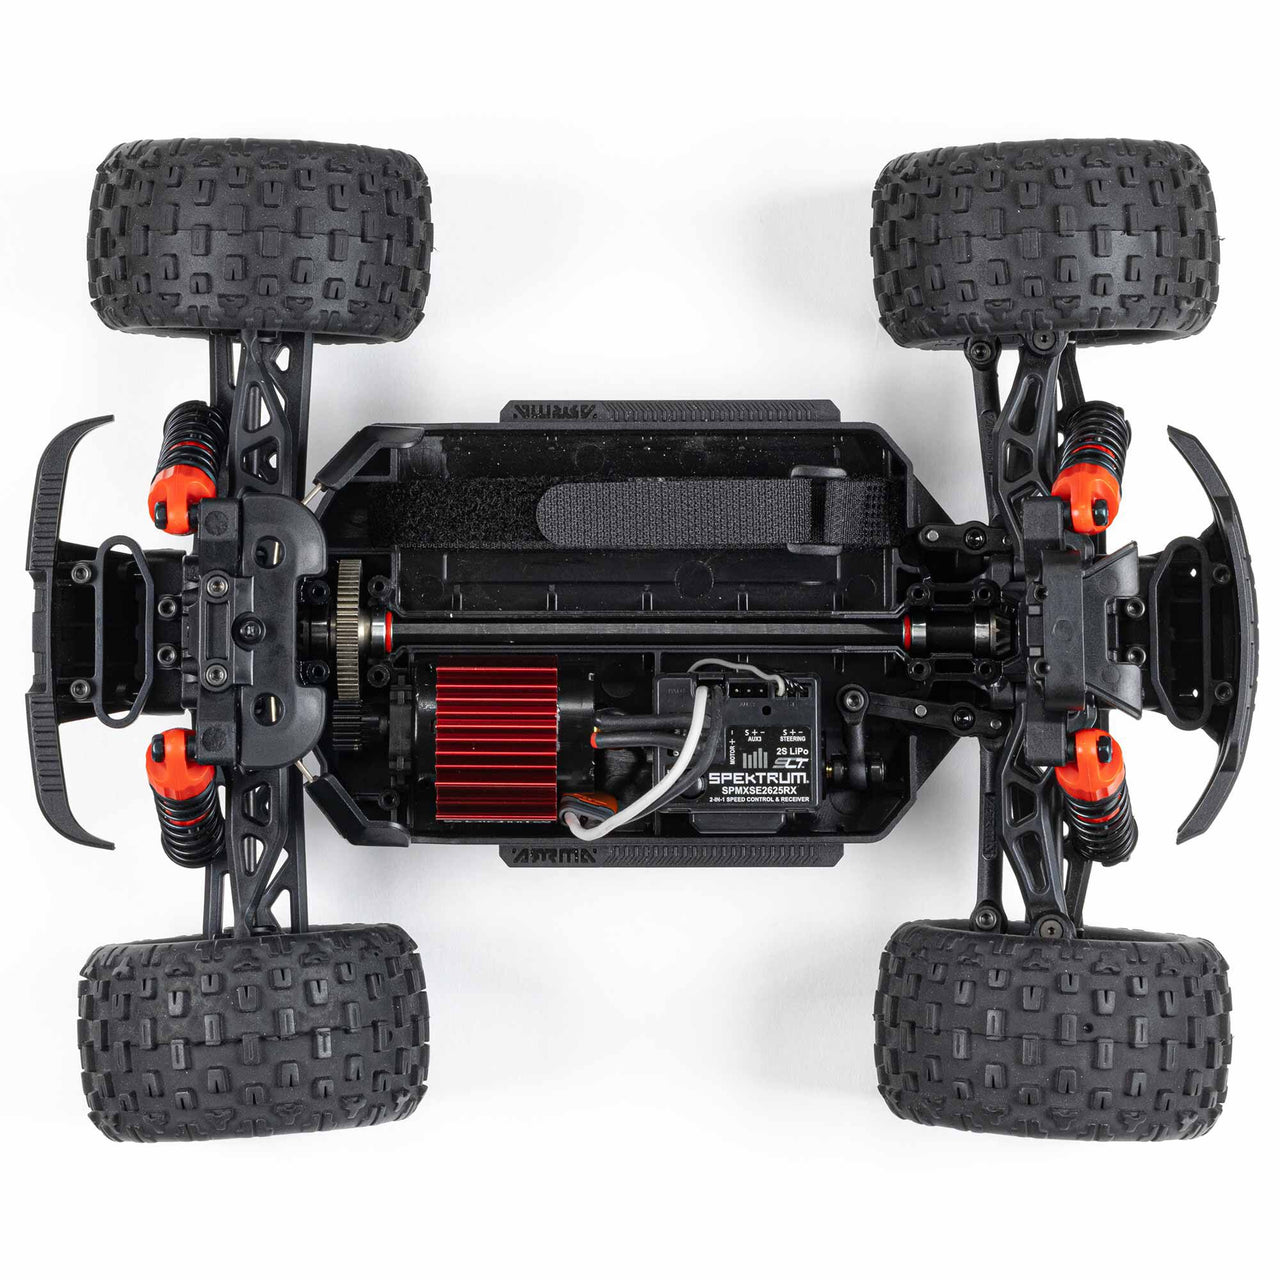 ARA2102T2 1/18 GRANITE GROM MEGA 380 Brushed 4X4 Monster Truck RTR with Battery & Charger, Red (in store only)